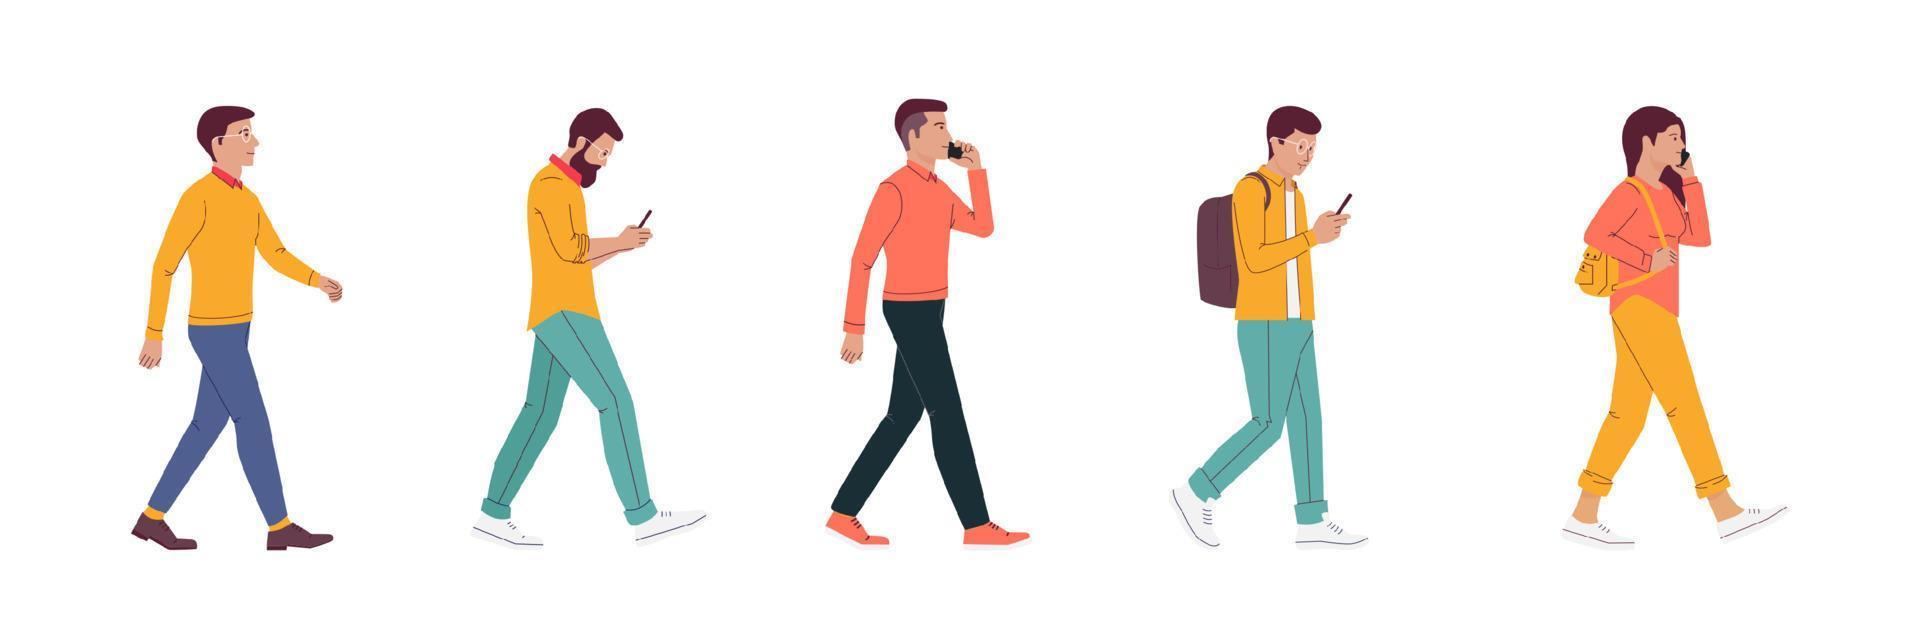 The profile of various people walking down the street. flat design style minimal vector illustration.